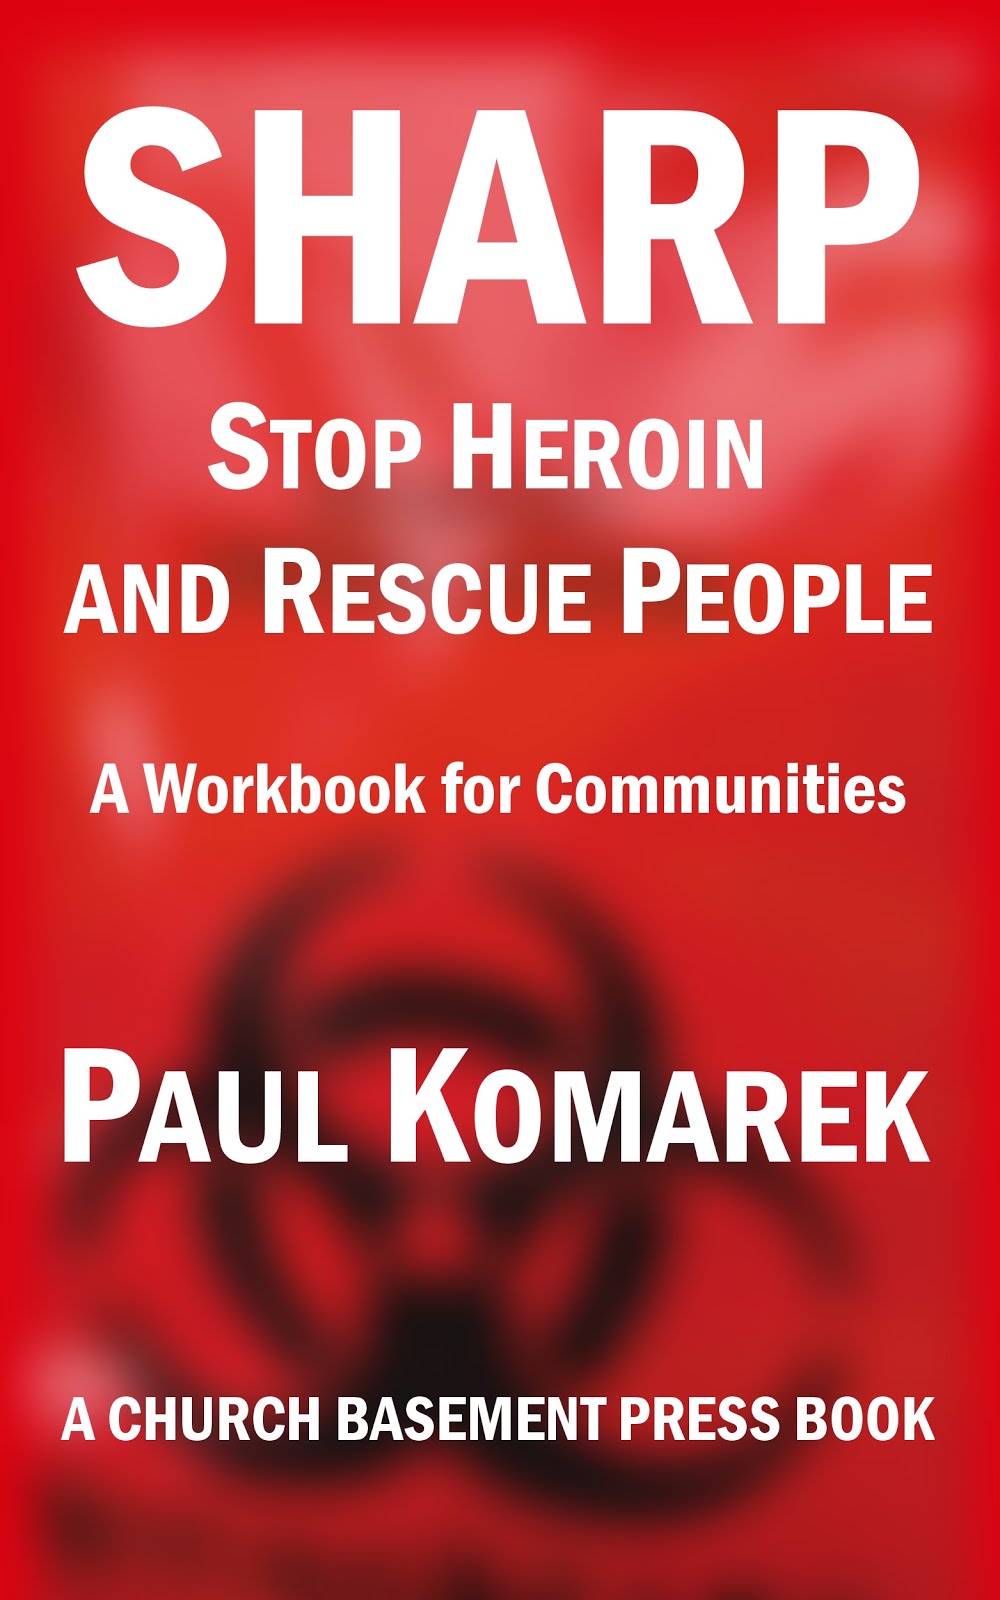 Systematic Rescue for Heroin